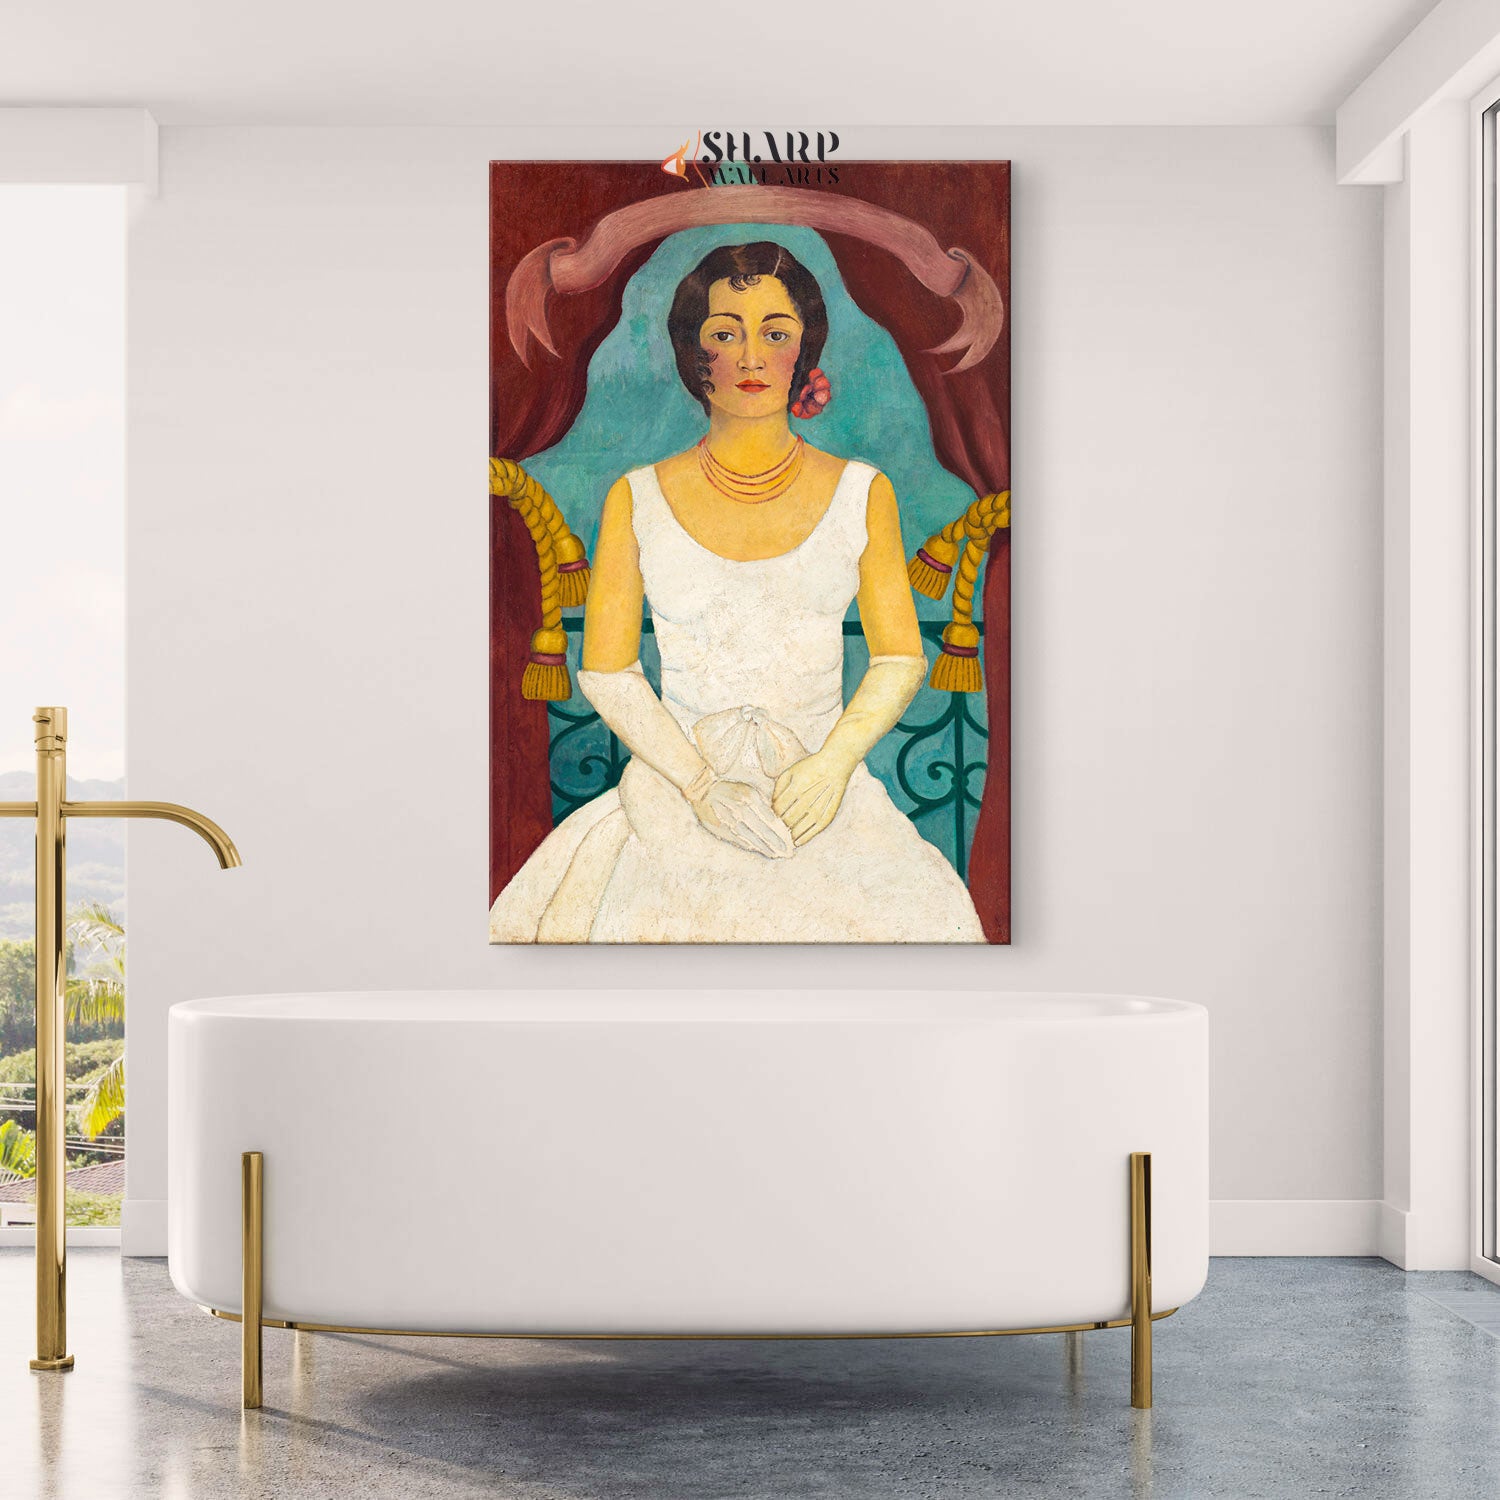 Frida Kahlo Portrait Of A Woman In White Canvas Wall Art